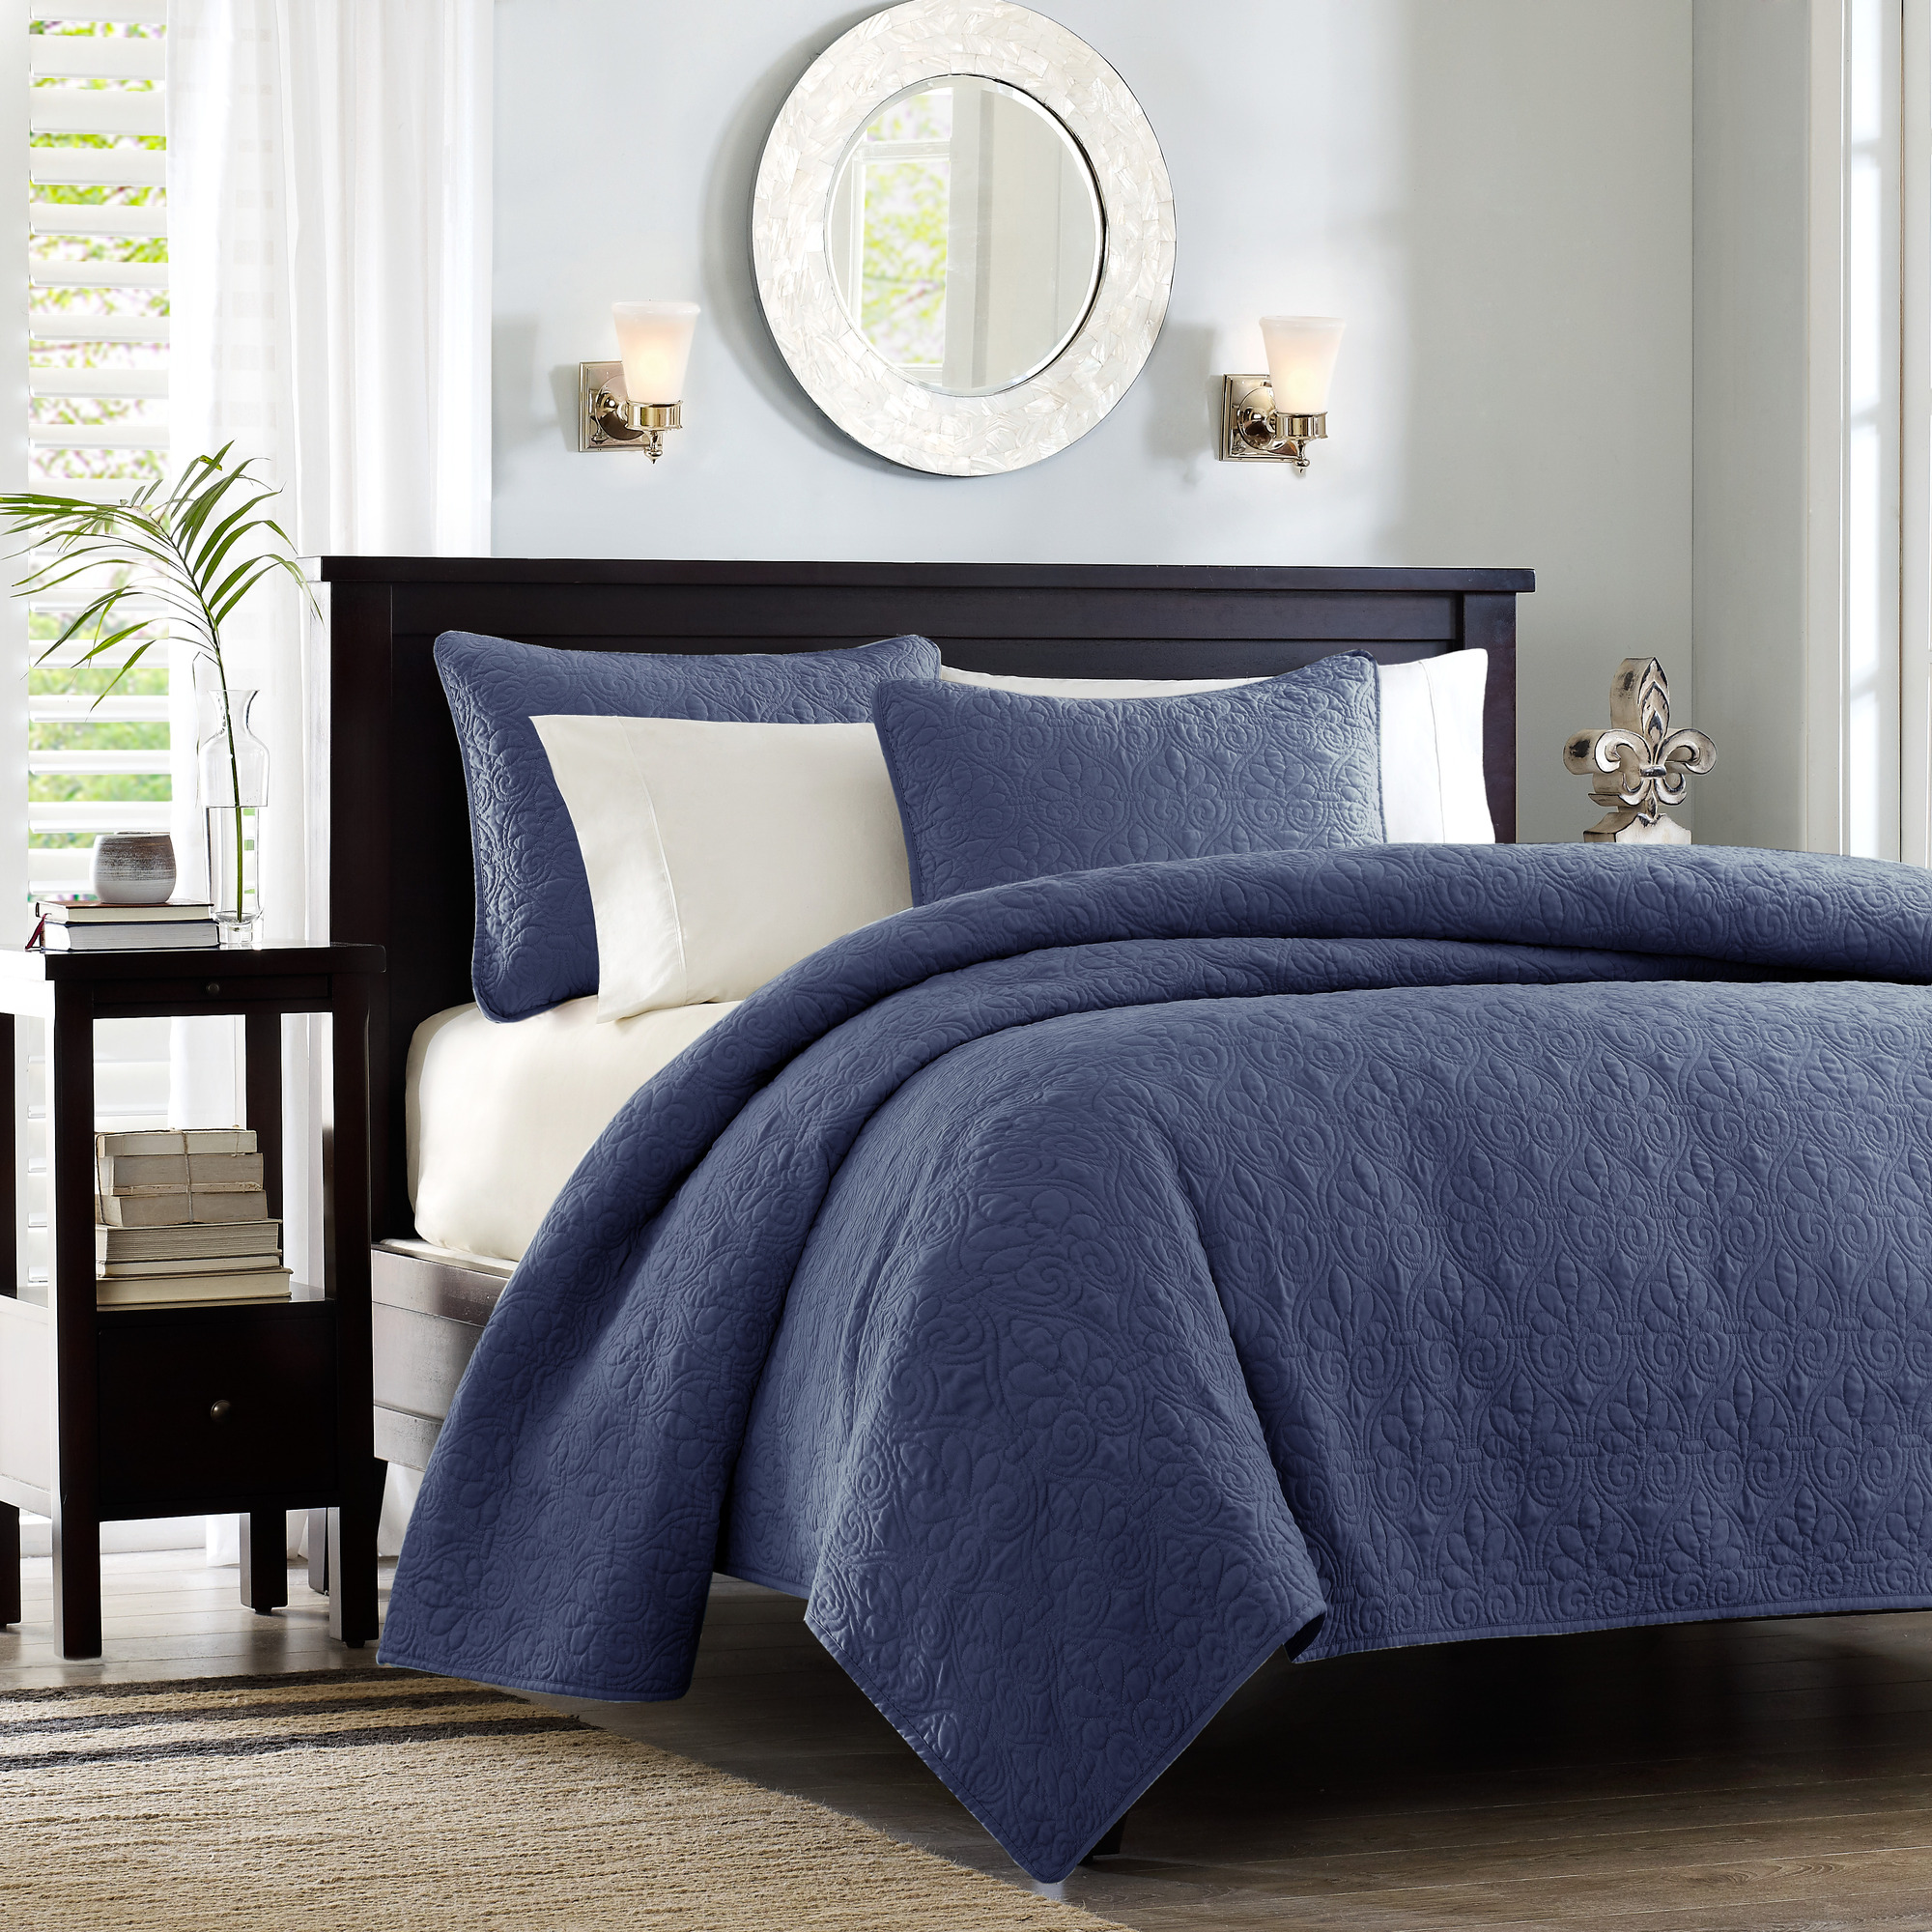 Home Essence Vancouver Super Soft Reversible Coverlet Set, Full/Queen, Navy - image 1 of 13